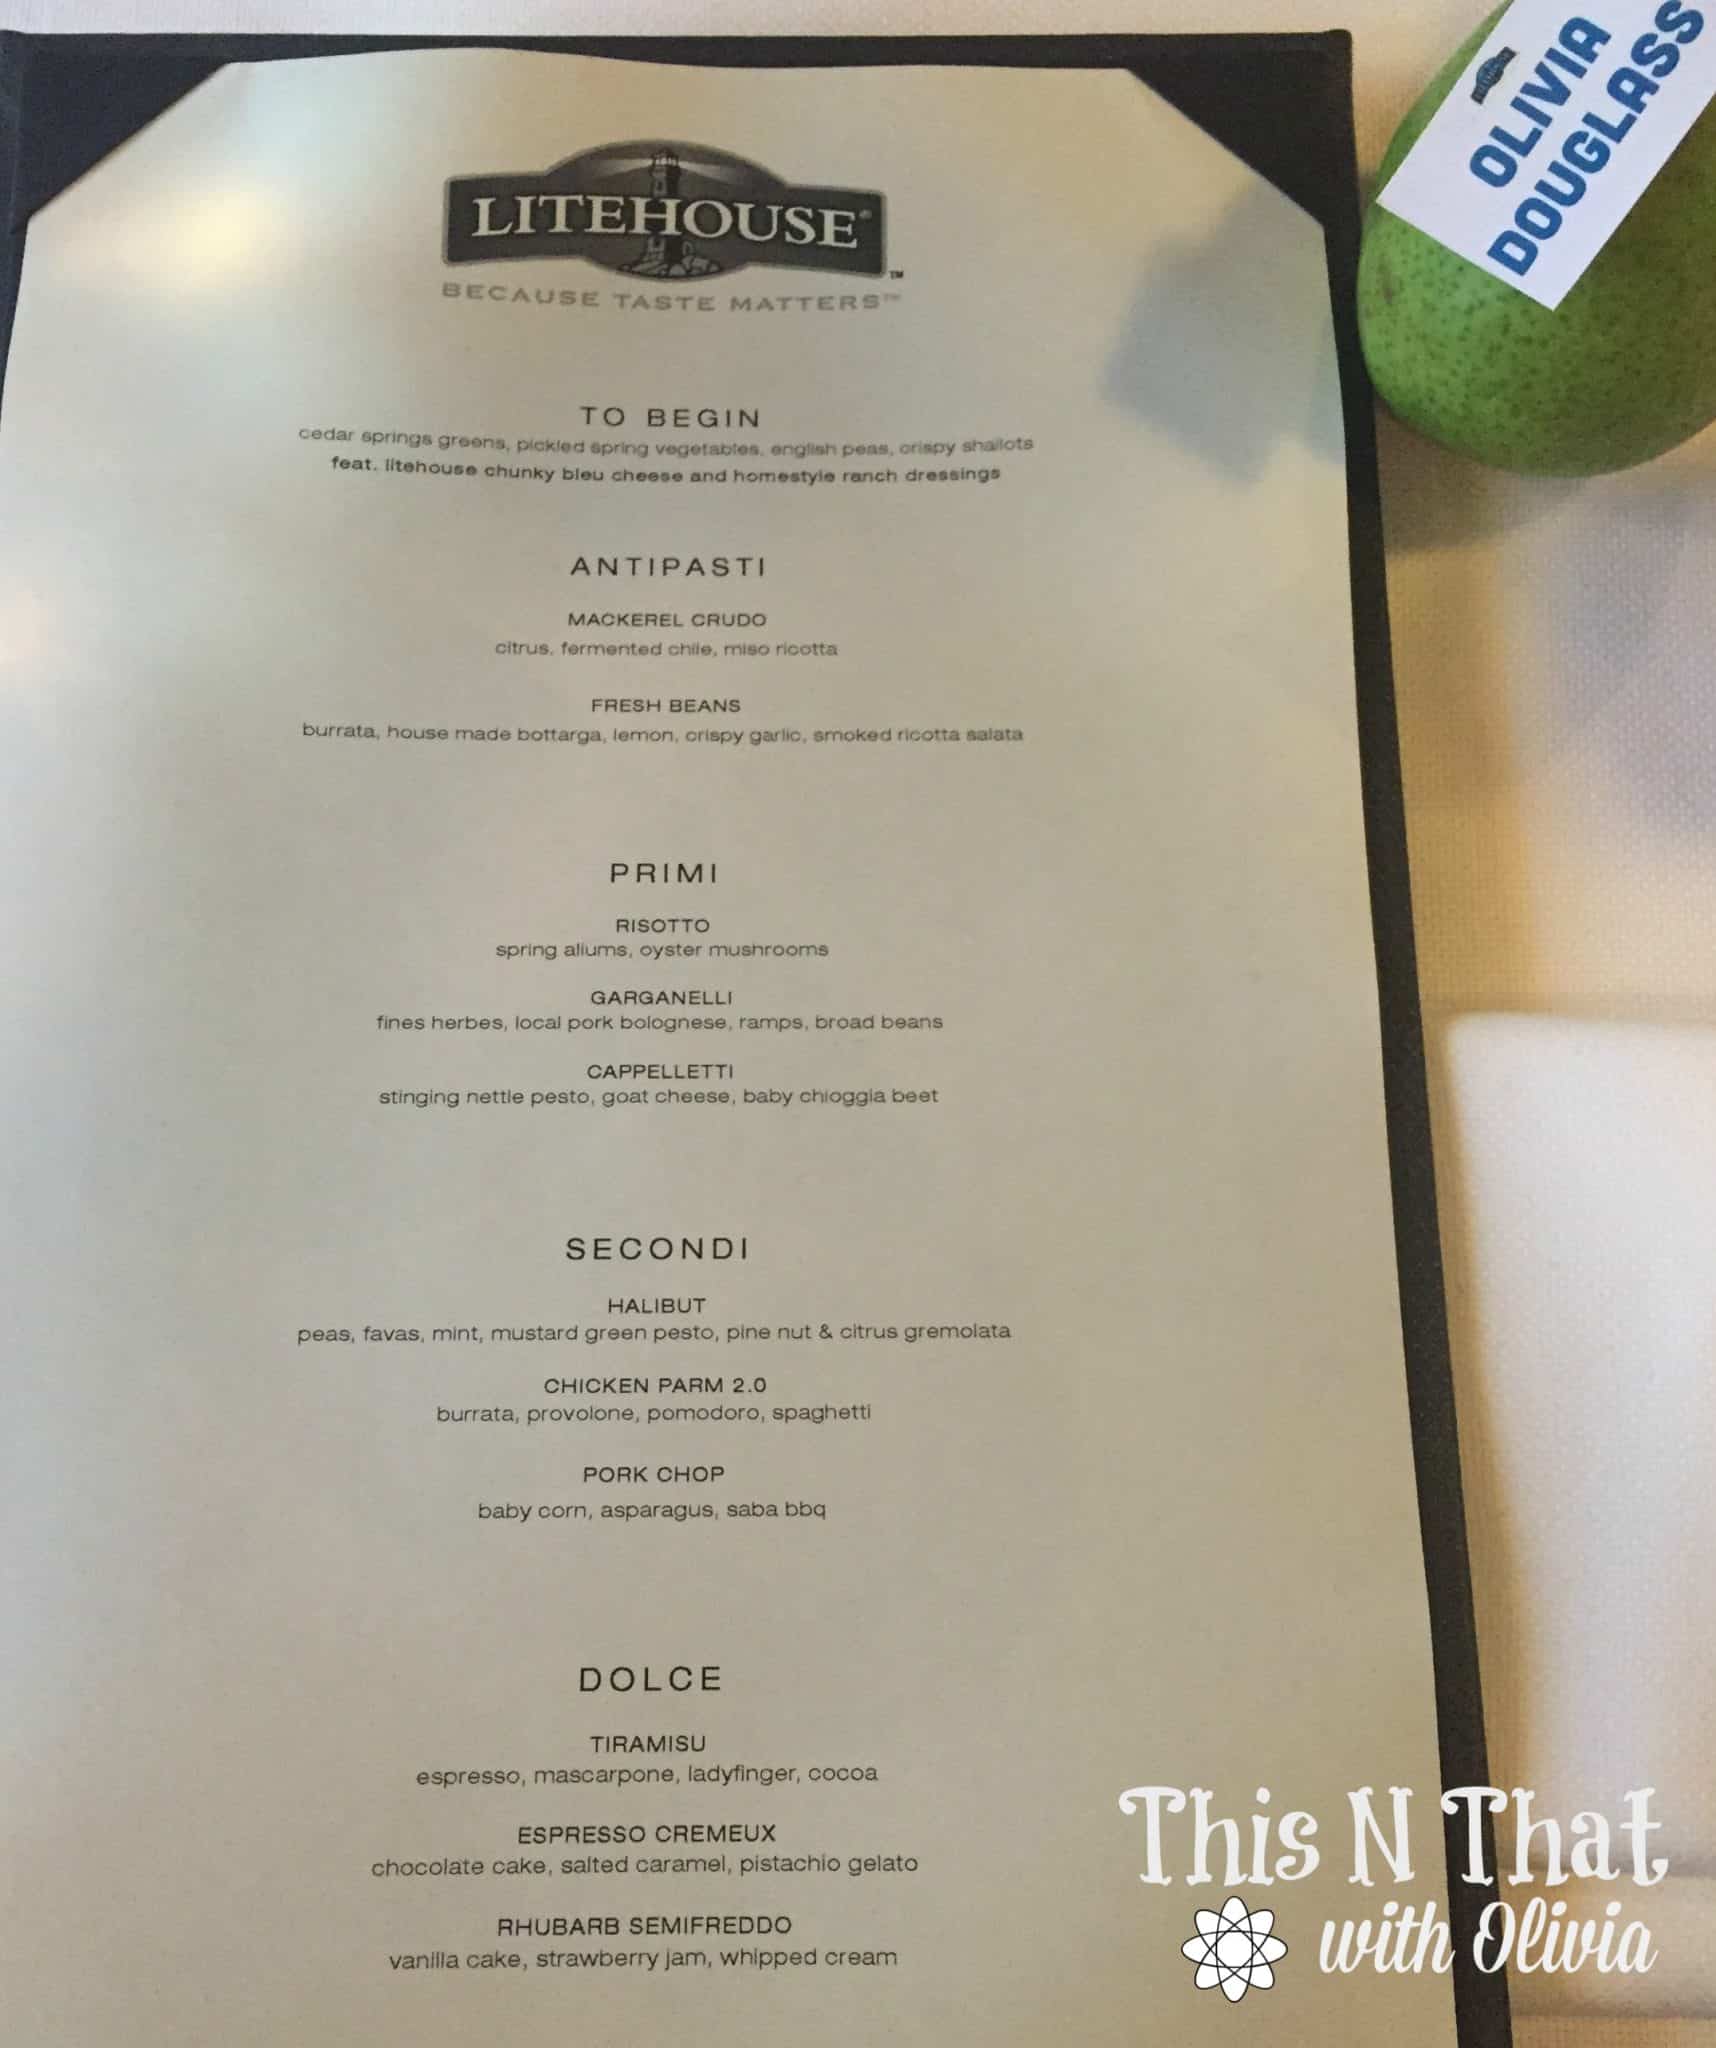 #SeeTheLite Event with @LitehouseFoods | ThisNThatwithOlivia.com